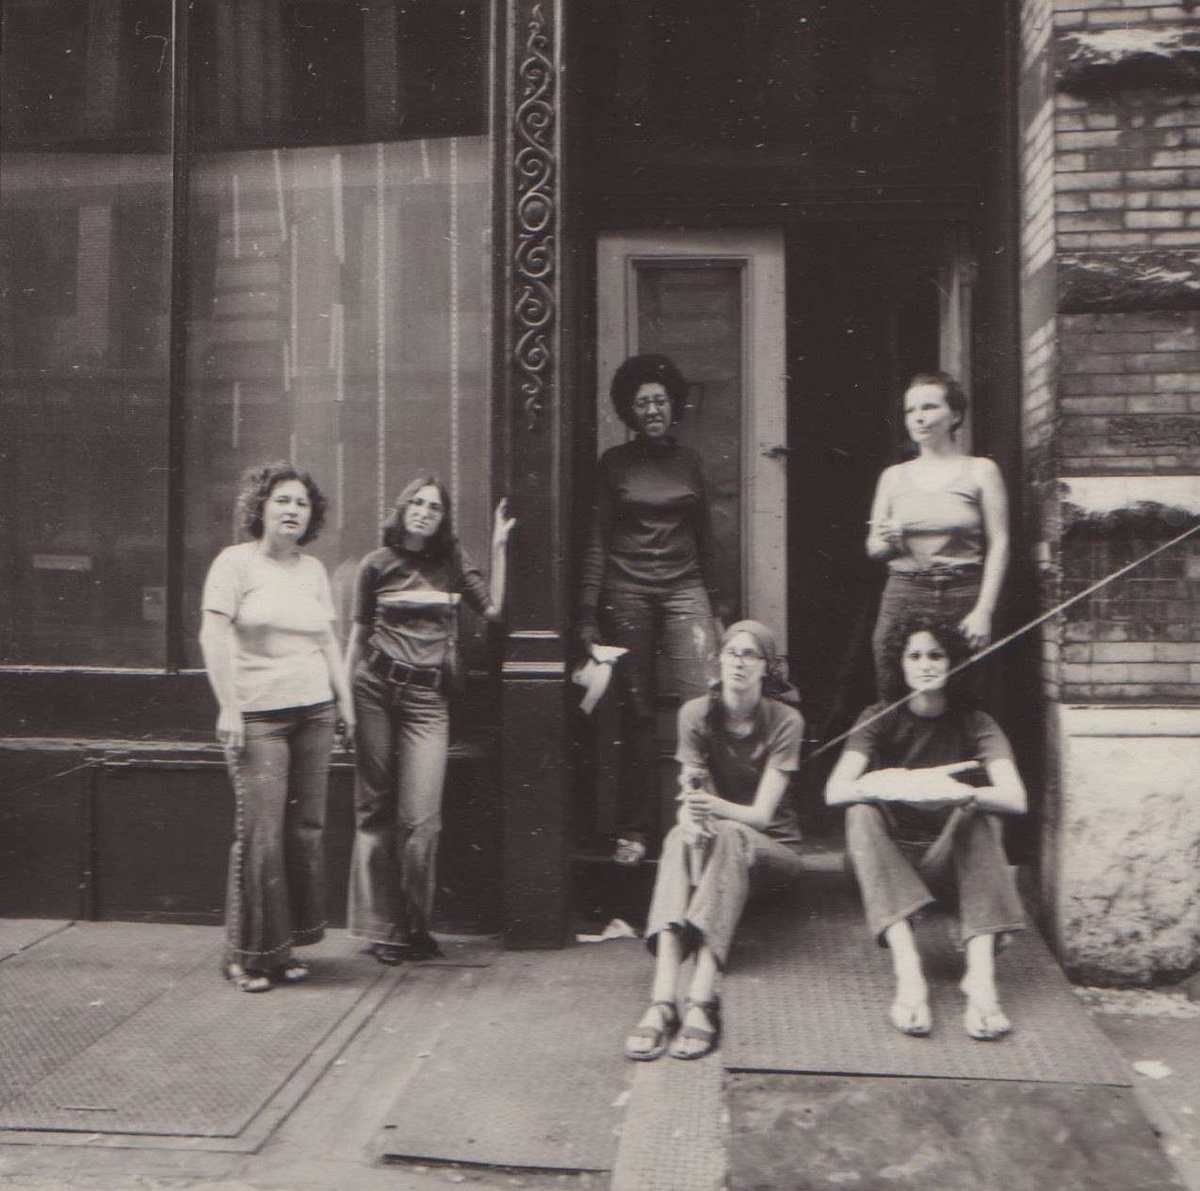 Black and white photo of A.I.R Gallery members in front of the original Crosby St. location in NYC.